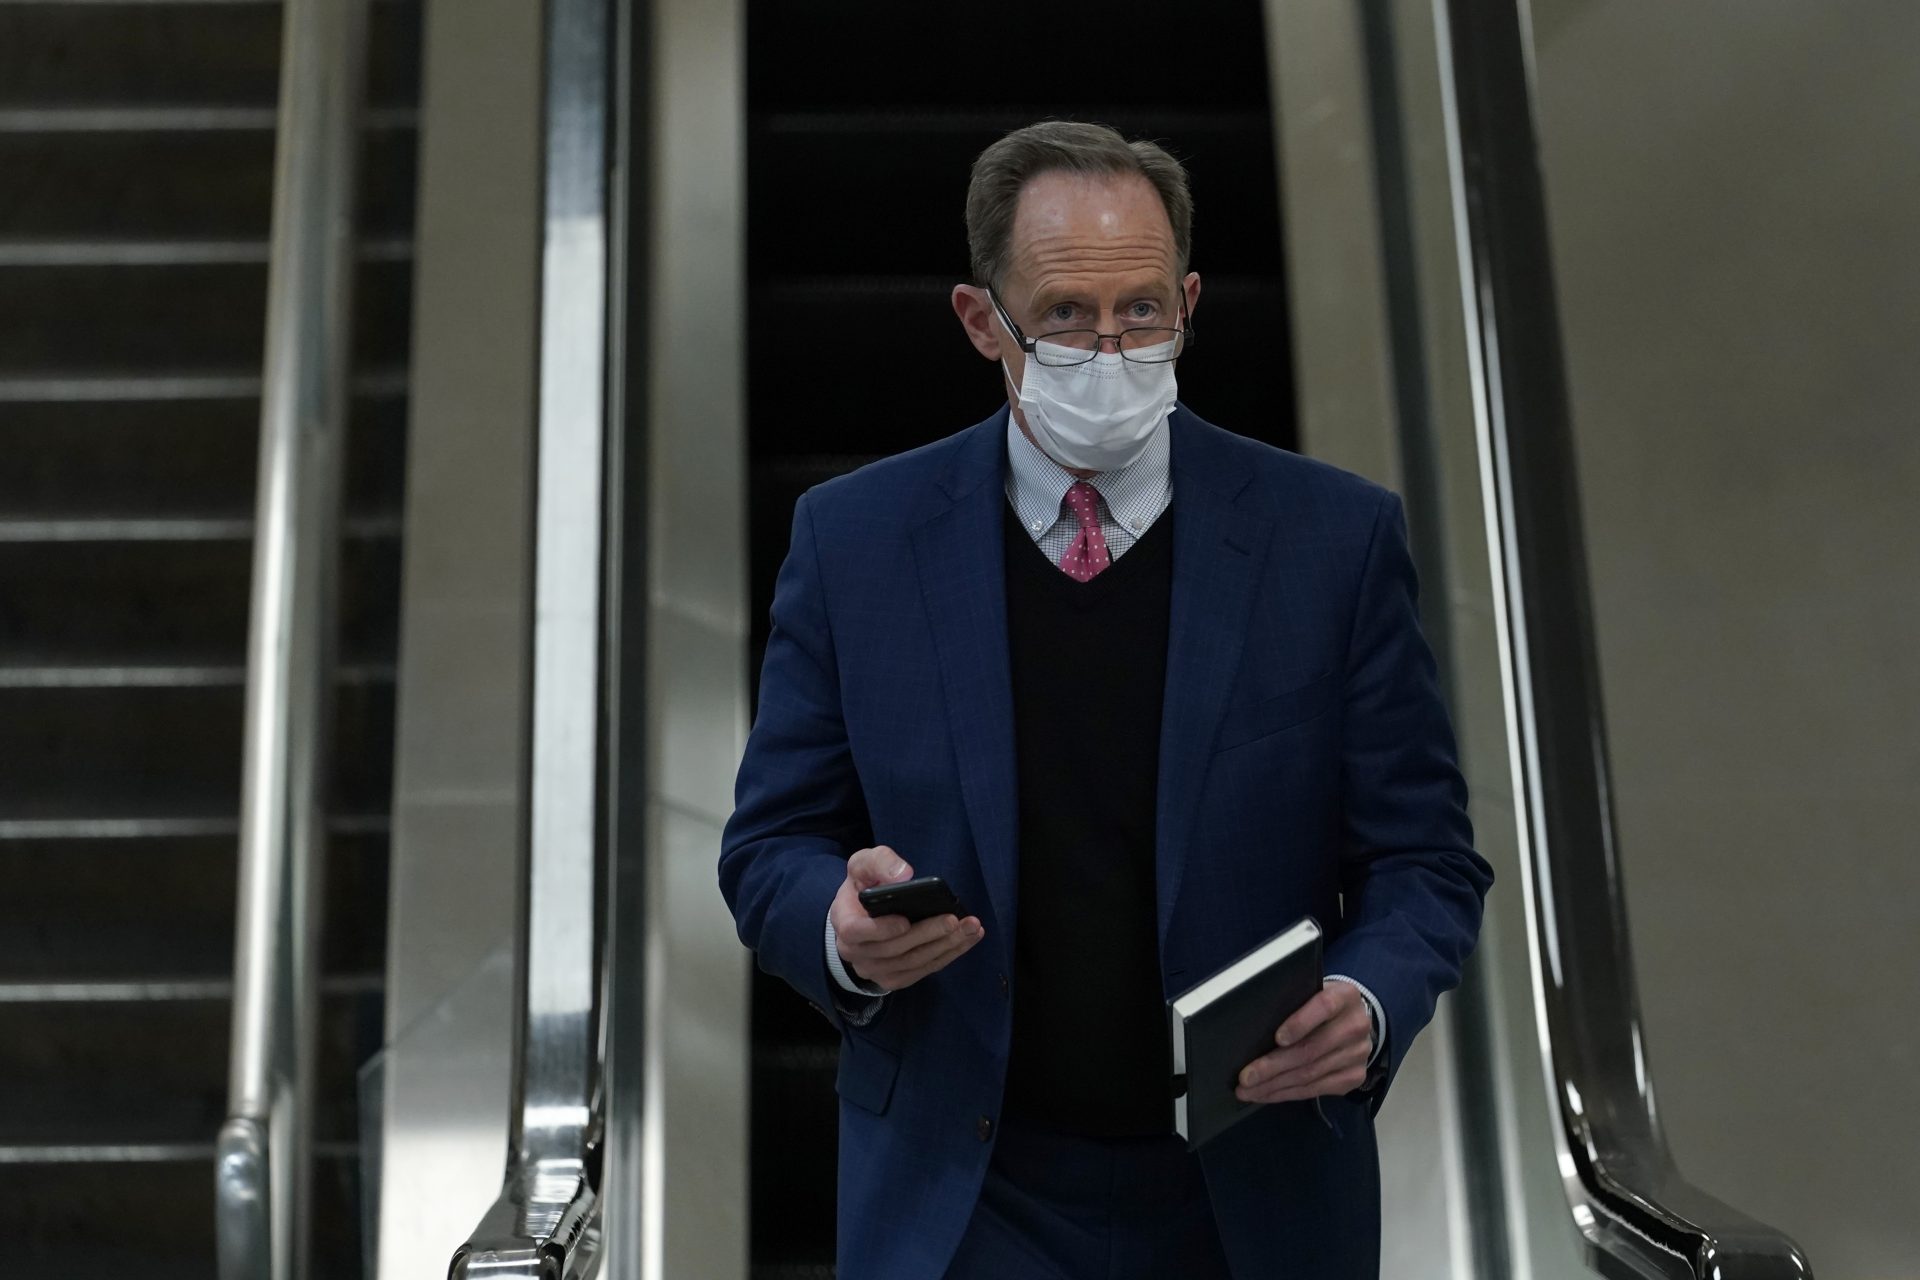 Sen. Pat Toomey, R-Pa., walks on Capitol Hill in Washington, Thursday, Feb. 11, 2021, after the third day of the second impeachment trial of former President Donald Trump.